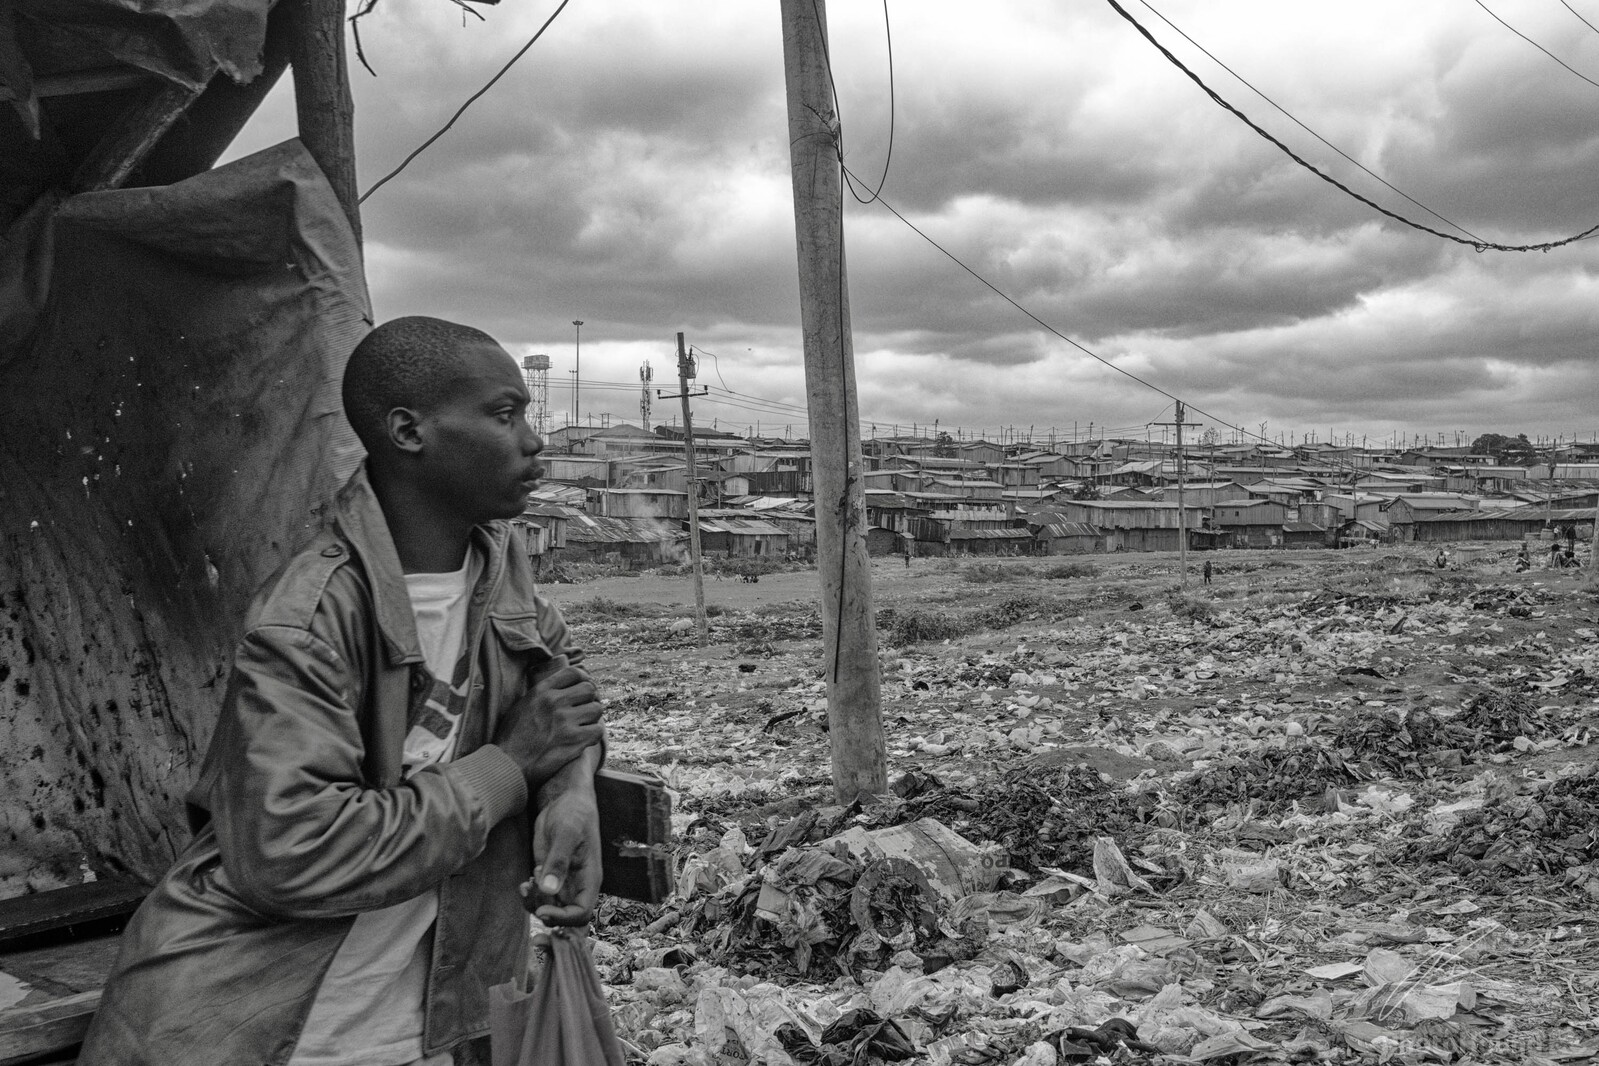 Image of Kibera - the largest urban slum of Africa by Patrick Hulley